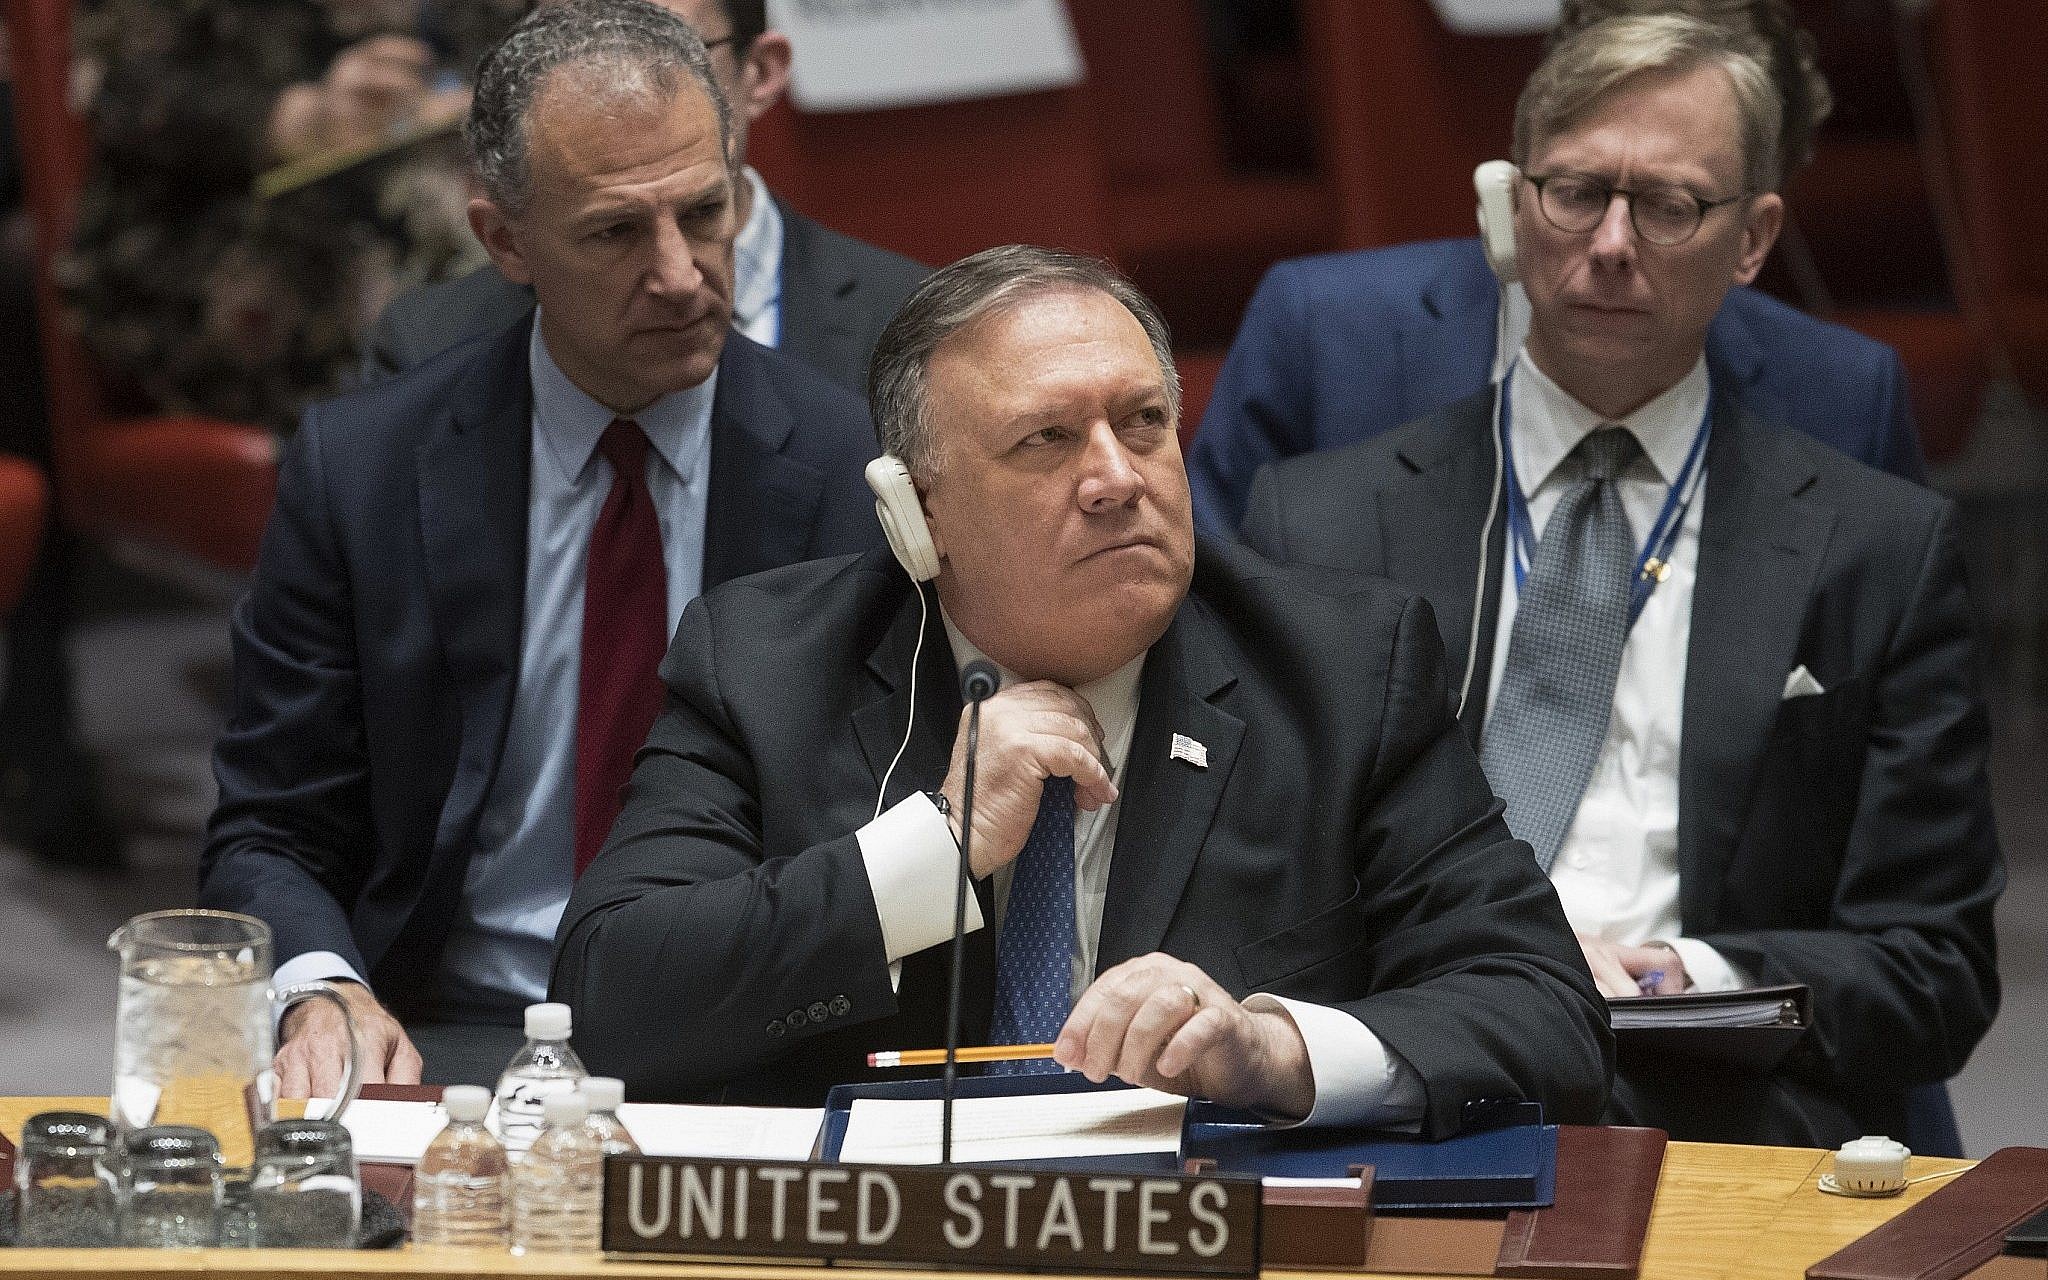 Pompeo at United Nations says Iran stocking up on ballistic missiles